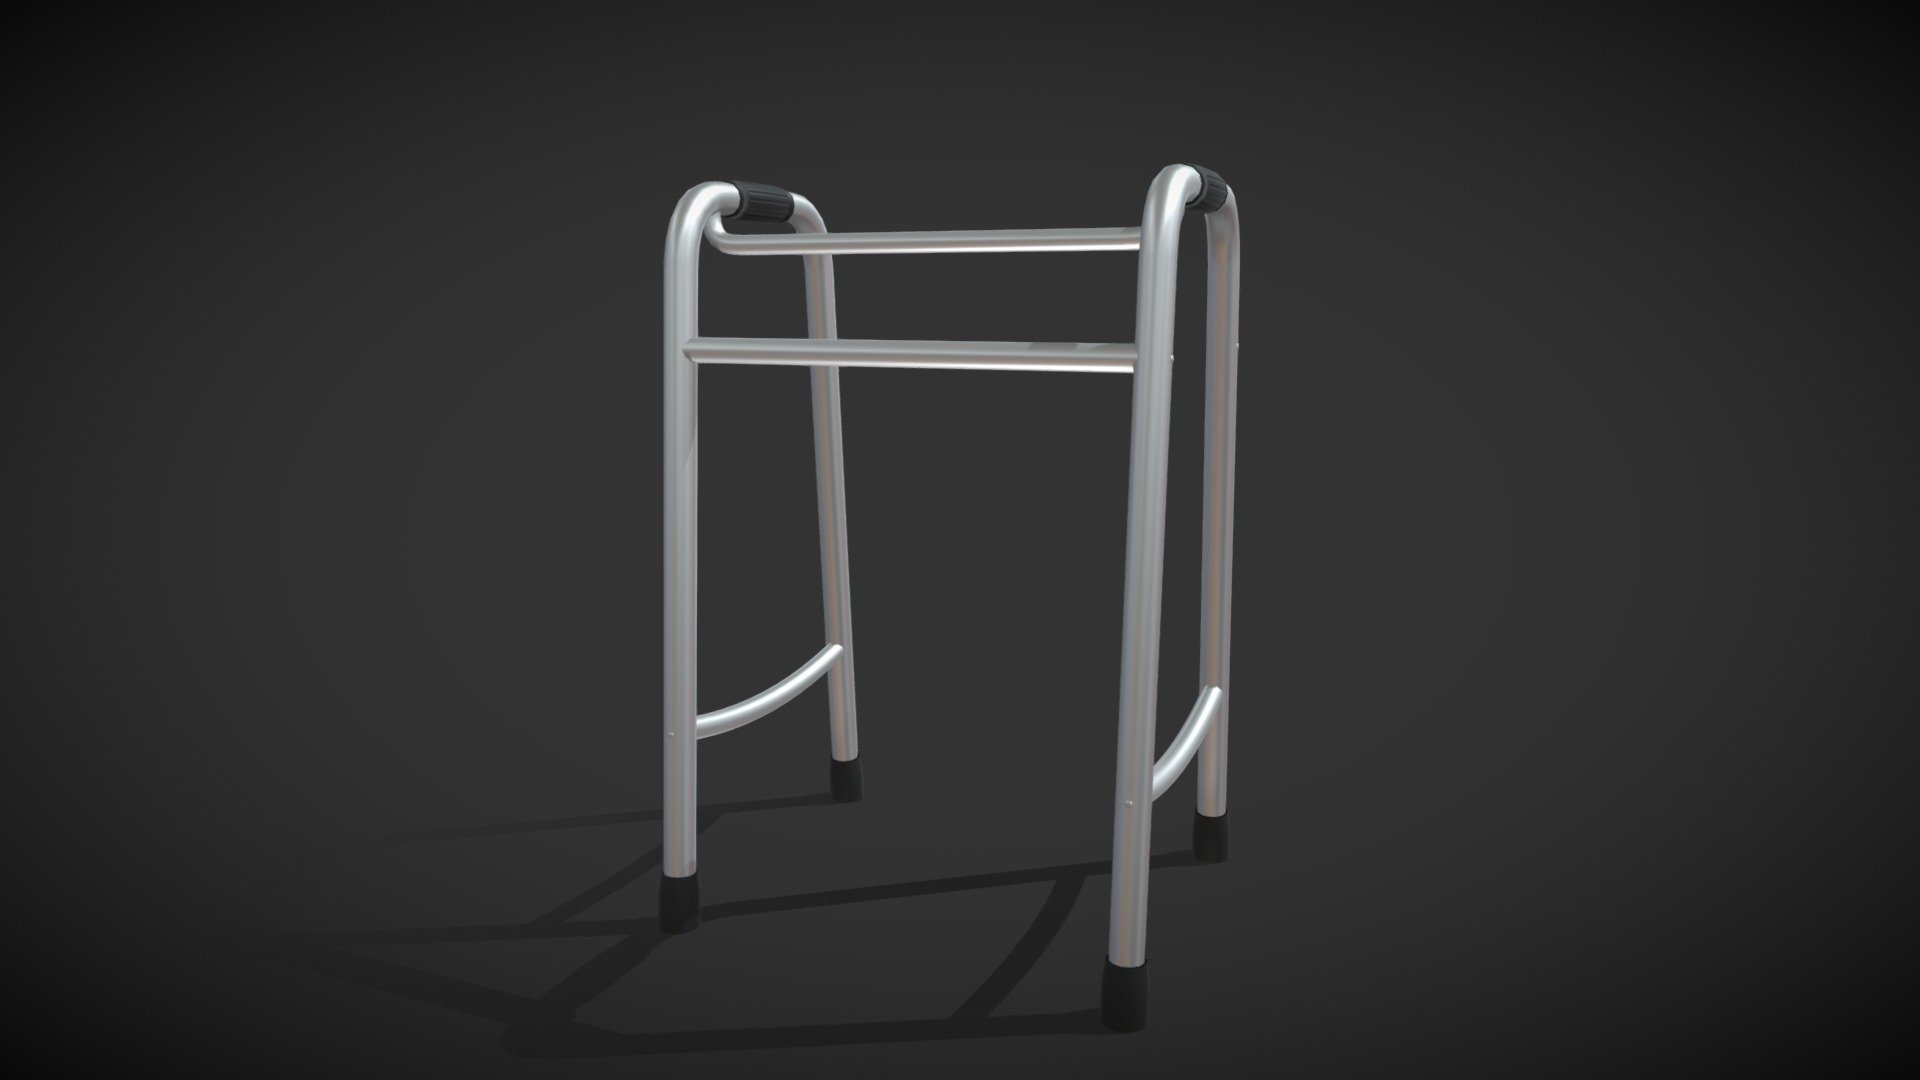 Elderly fracture walking aids 4 legs alluminium, ideal for uneven/outdoor terrain . This 3d model originally crated on Blender 2.79b.




It's have clean typology and unwrapped correctly.

It's have realistic style ready for your real time project.

2936 tris, 1616 verts.

It's contain texture with png format,
- Diffuse / albedo 2048 pixel.
- Ambient oclussion 4096 pixel.
- Diffuse with ambient oclussion mixed 4096 pixel.
- Normal map 4096 pixel.
- Roughness 2048 pixel.
- Specular 2048 pixel.
- Metalness 2048 pixel.

I also have another walking aids 3d model on my collection 3d model